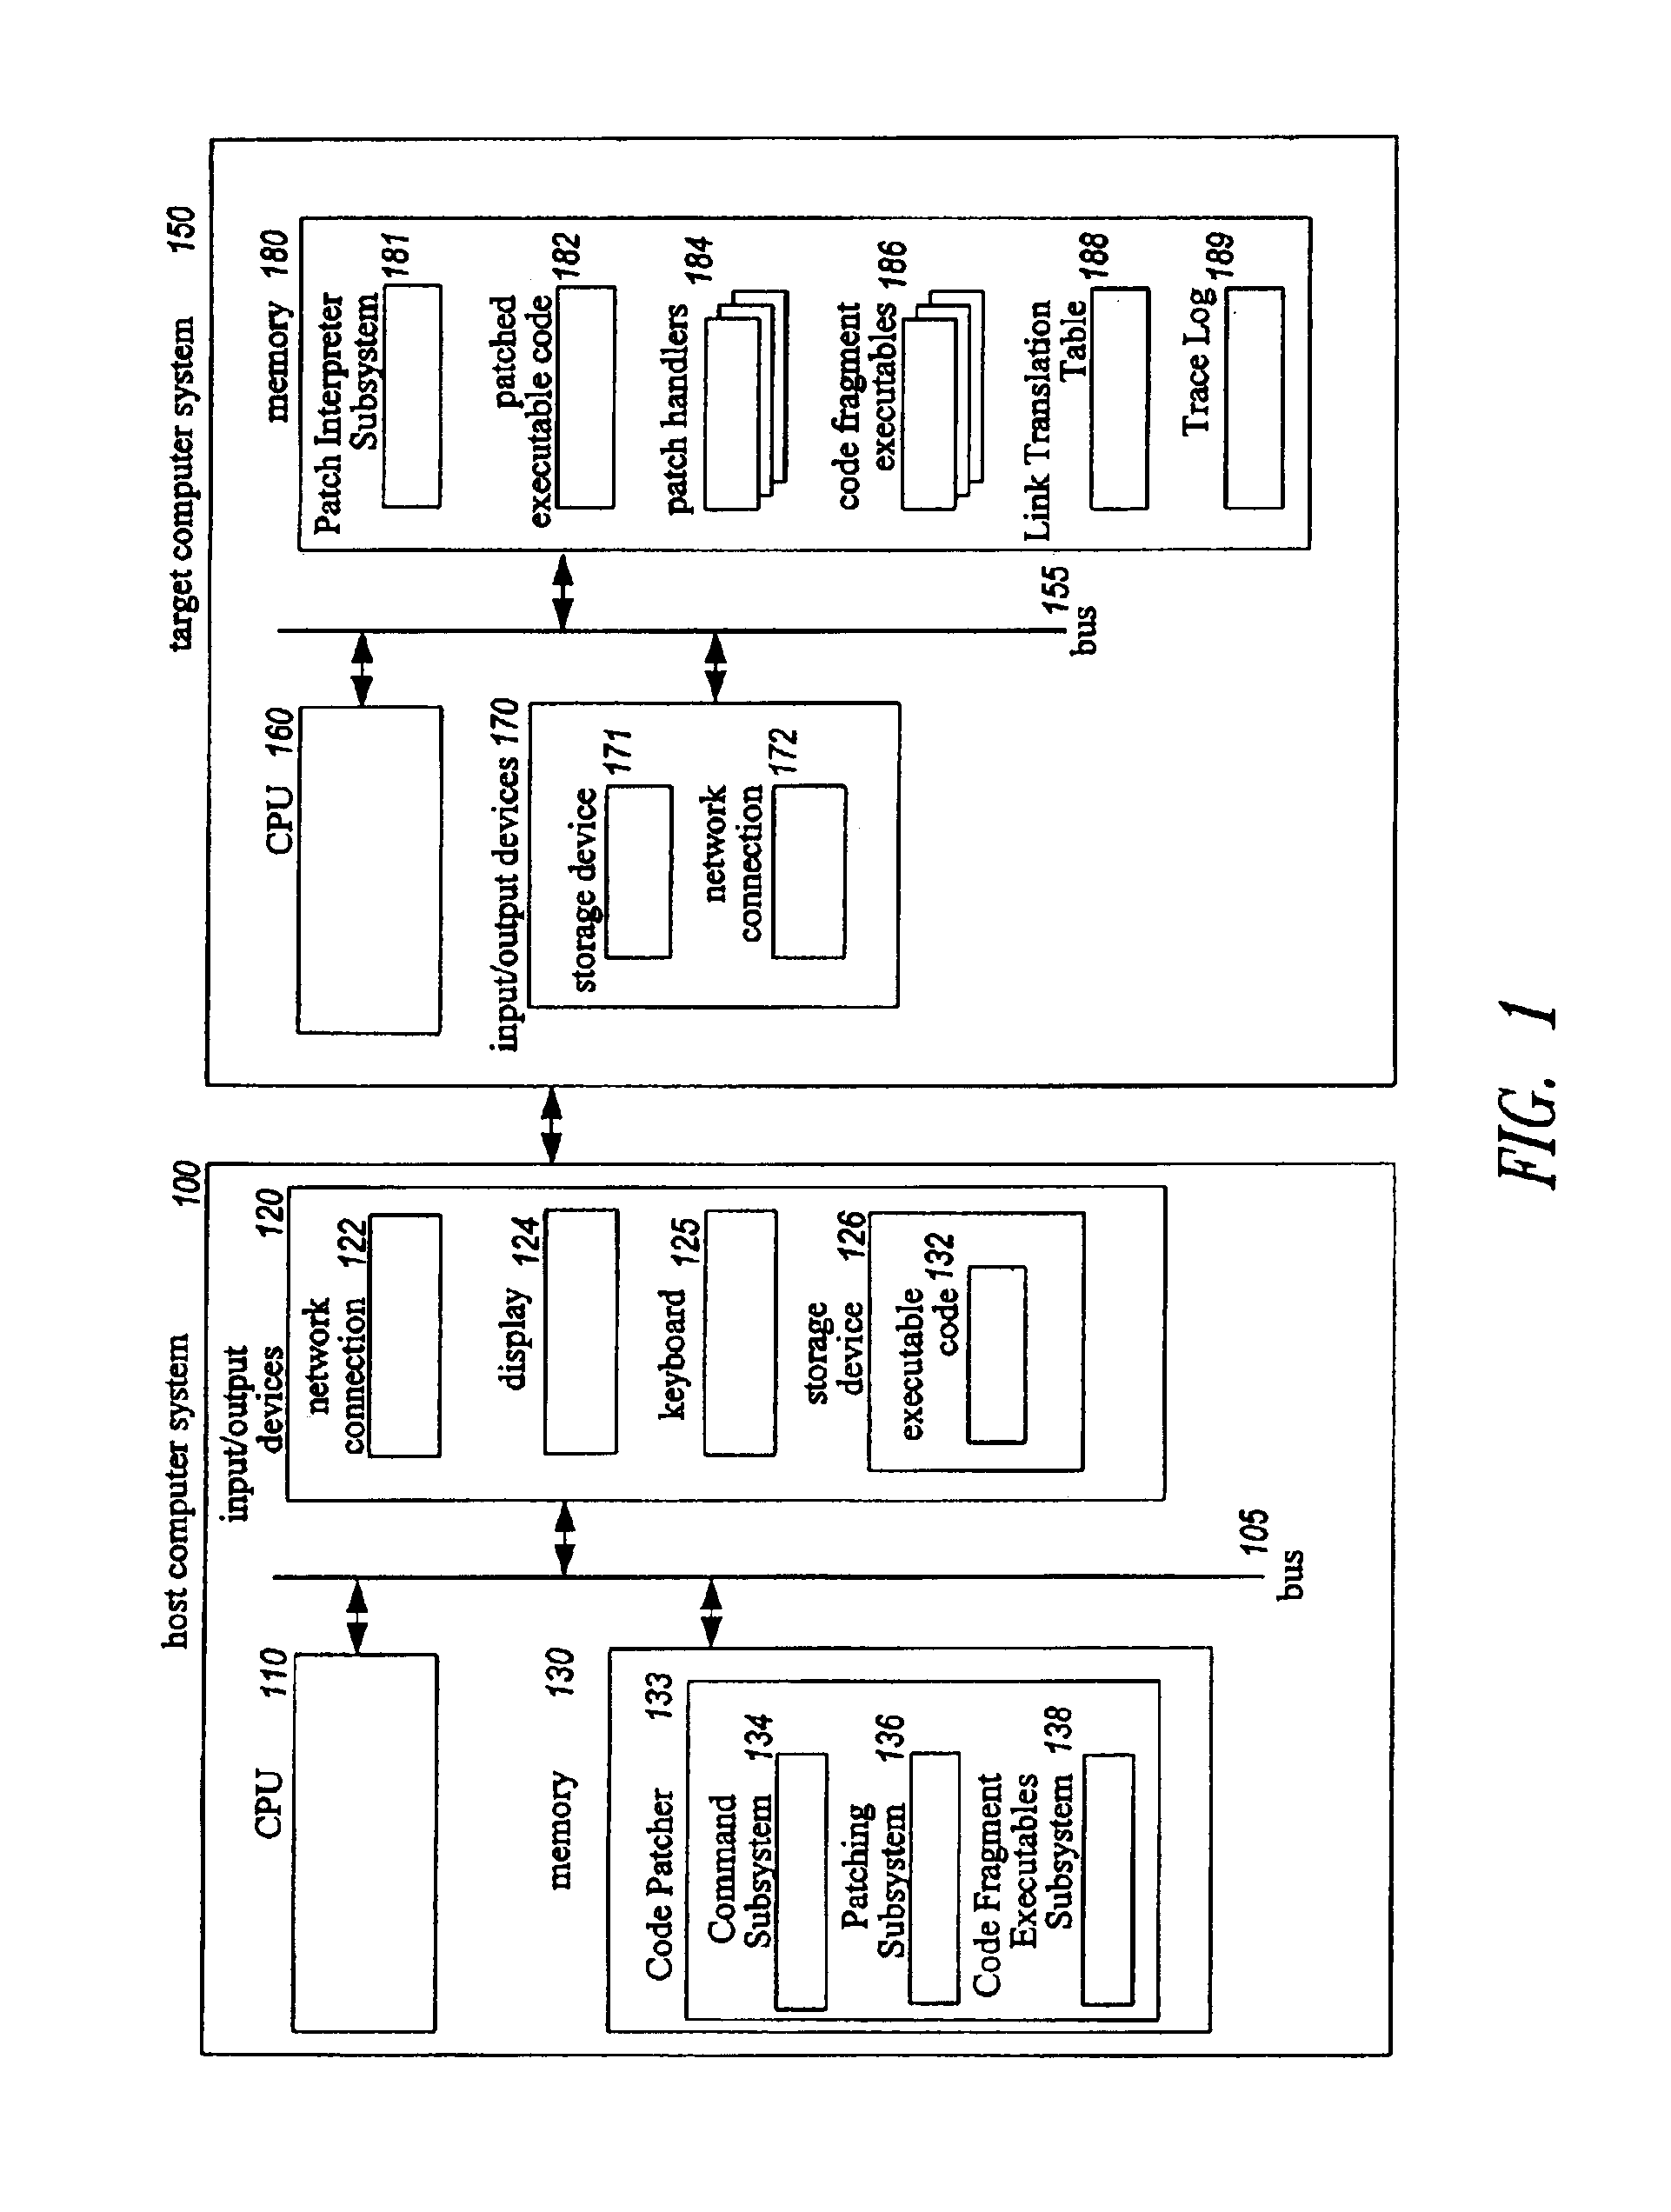 Method and system for modifying executable code to add additional functionality